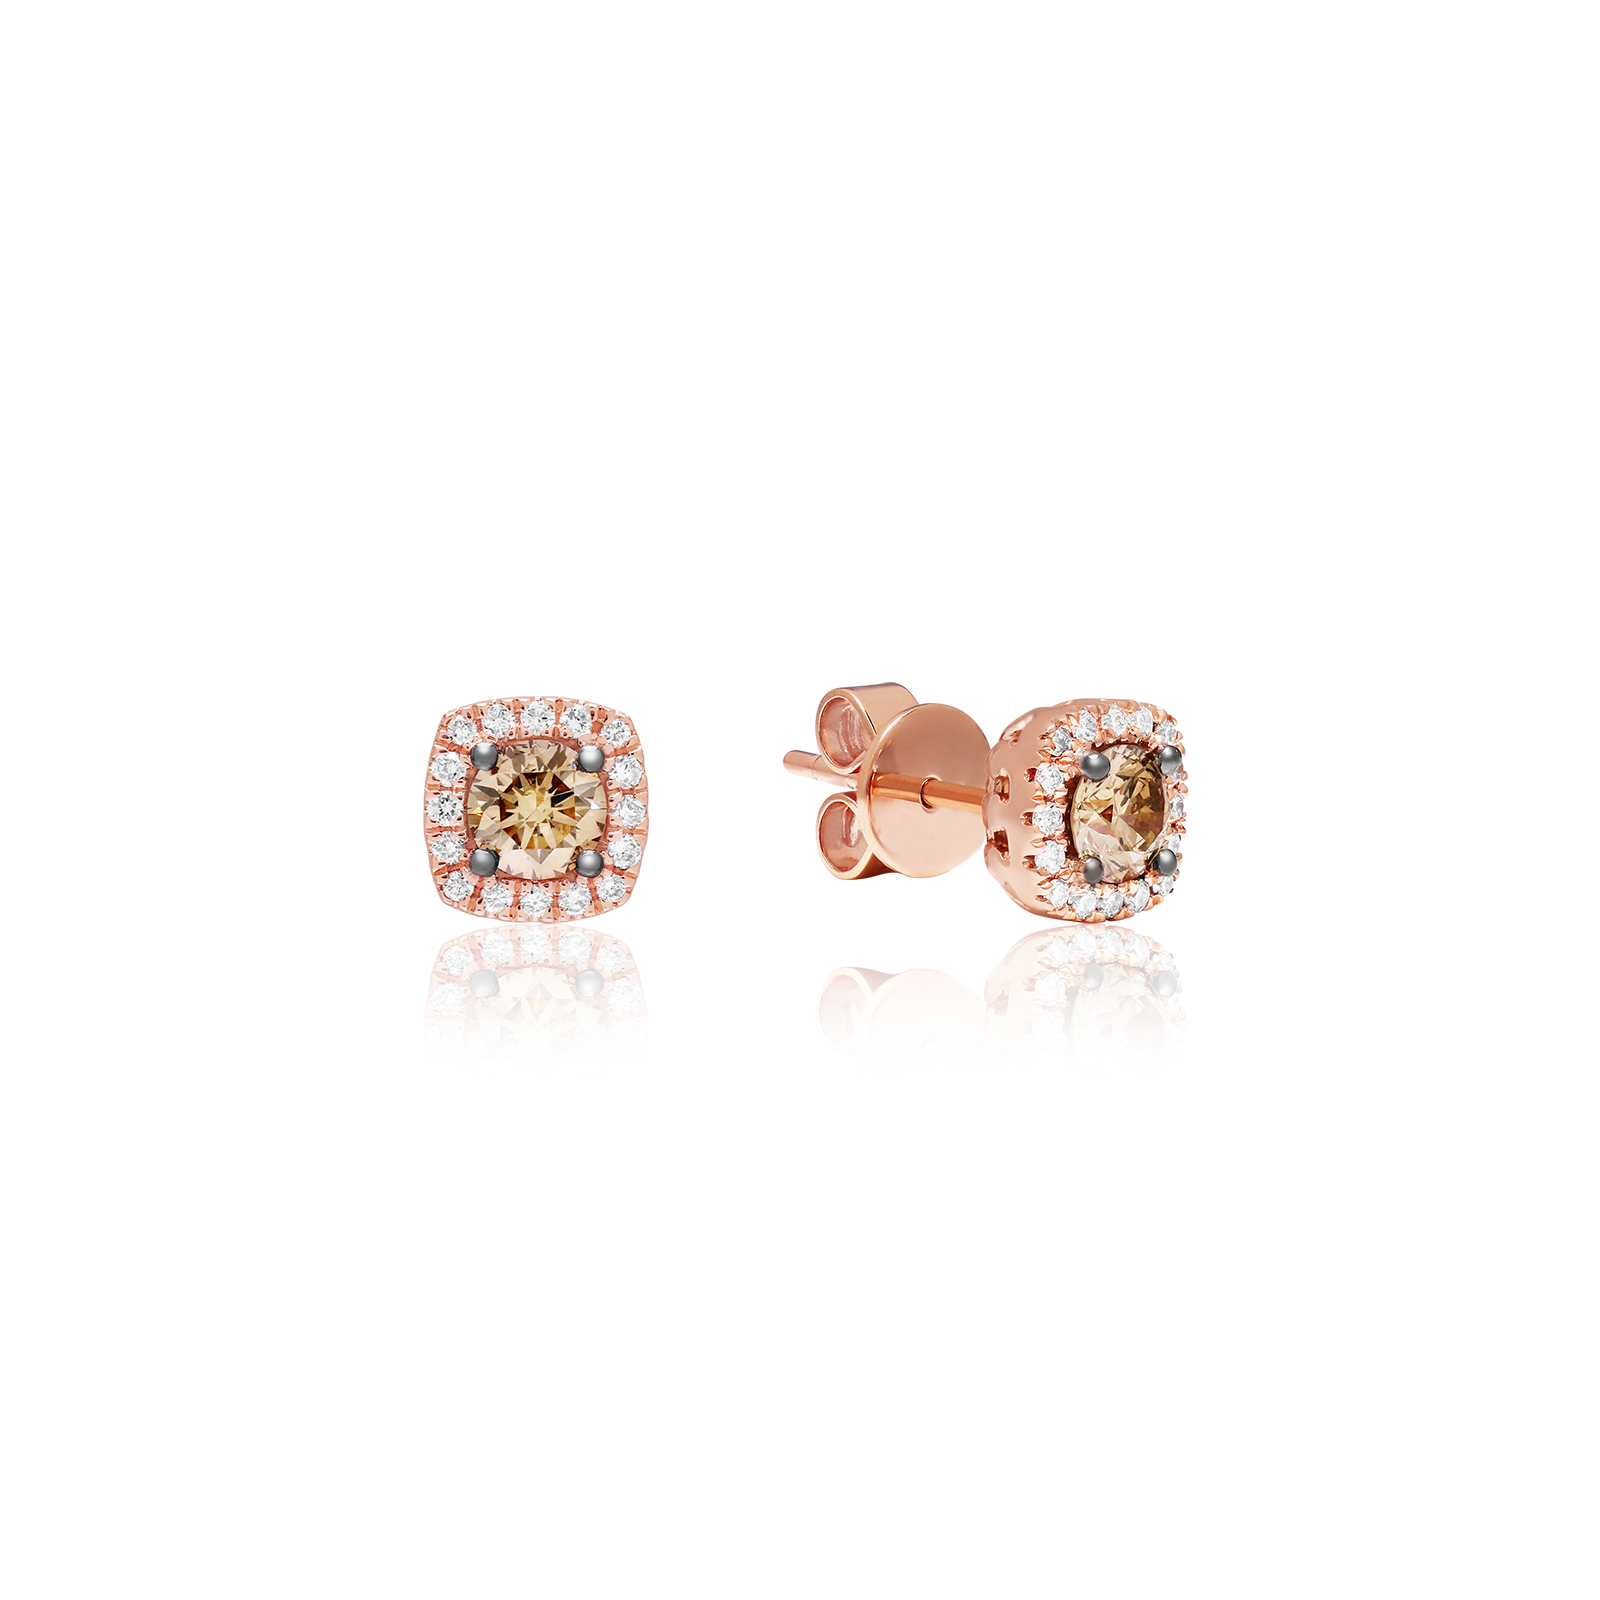 Round Diamond Stud Earrings 0.4 CT- 14K Solid Gold